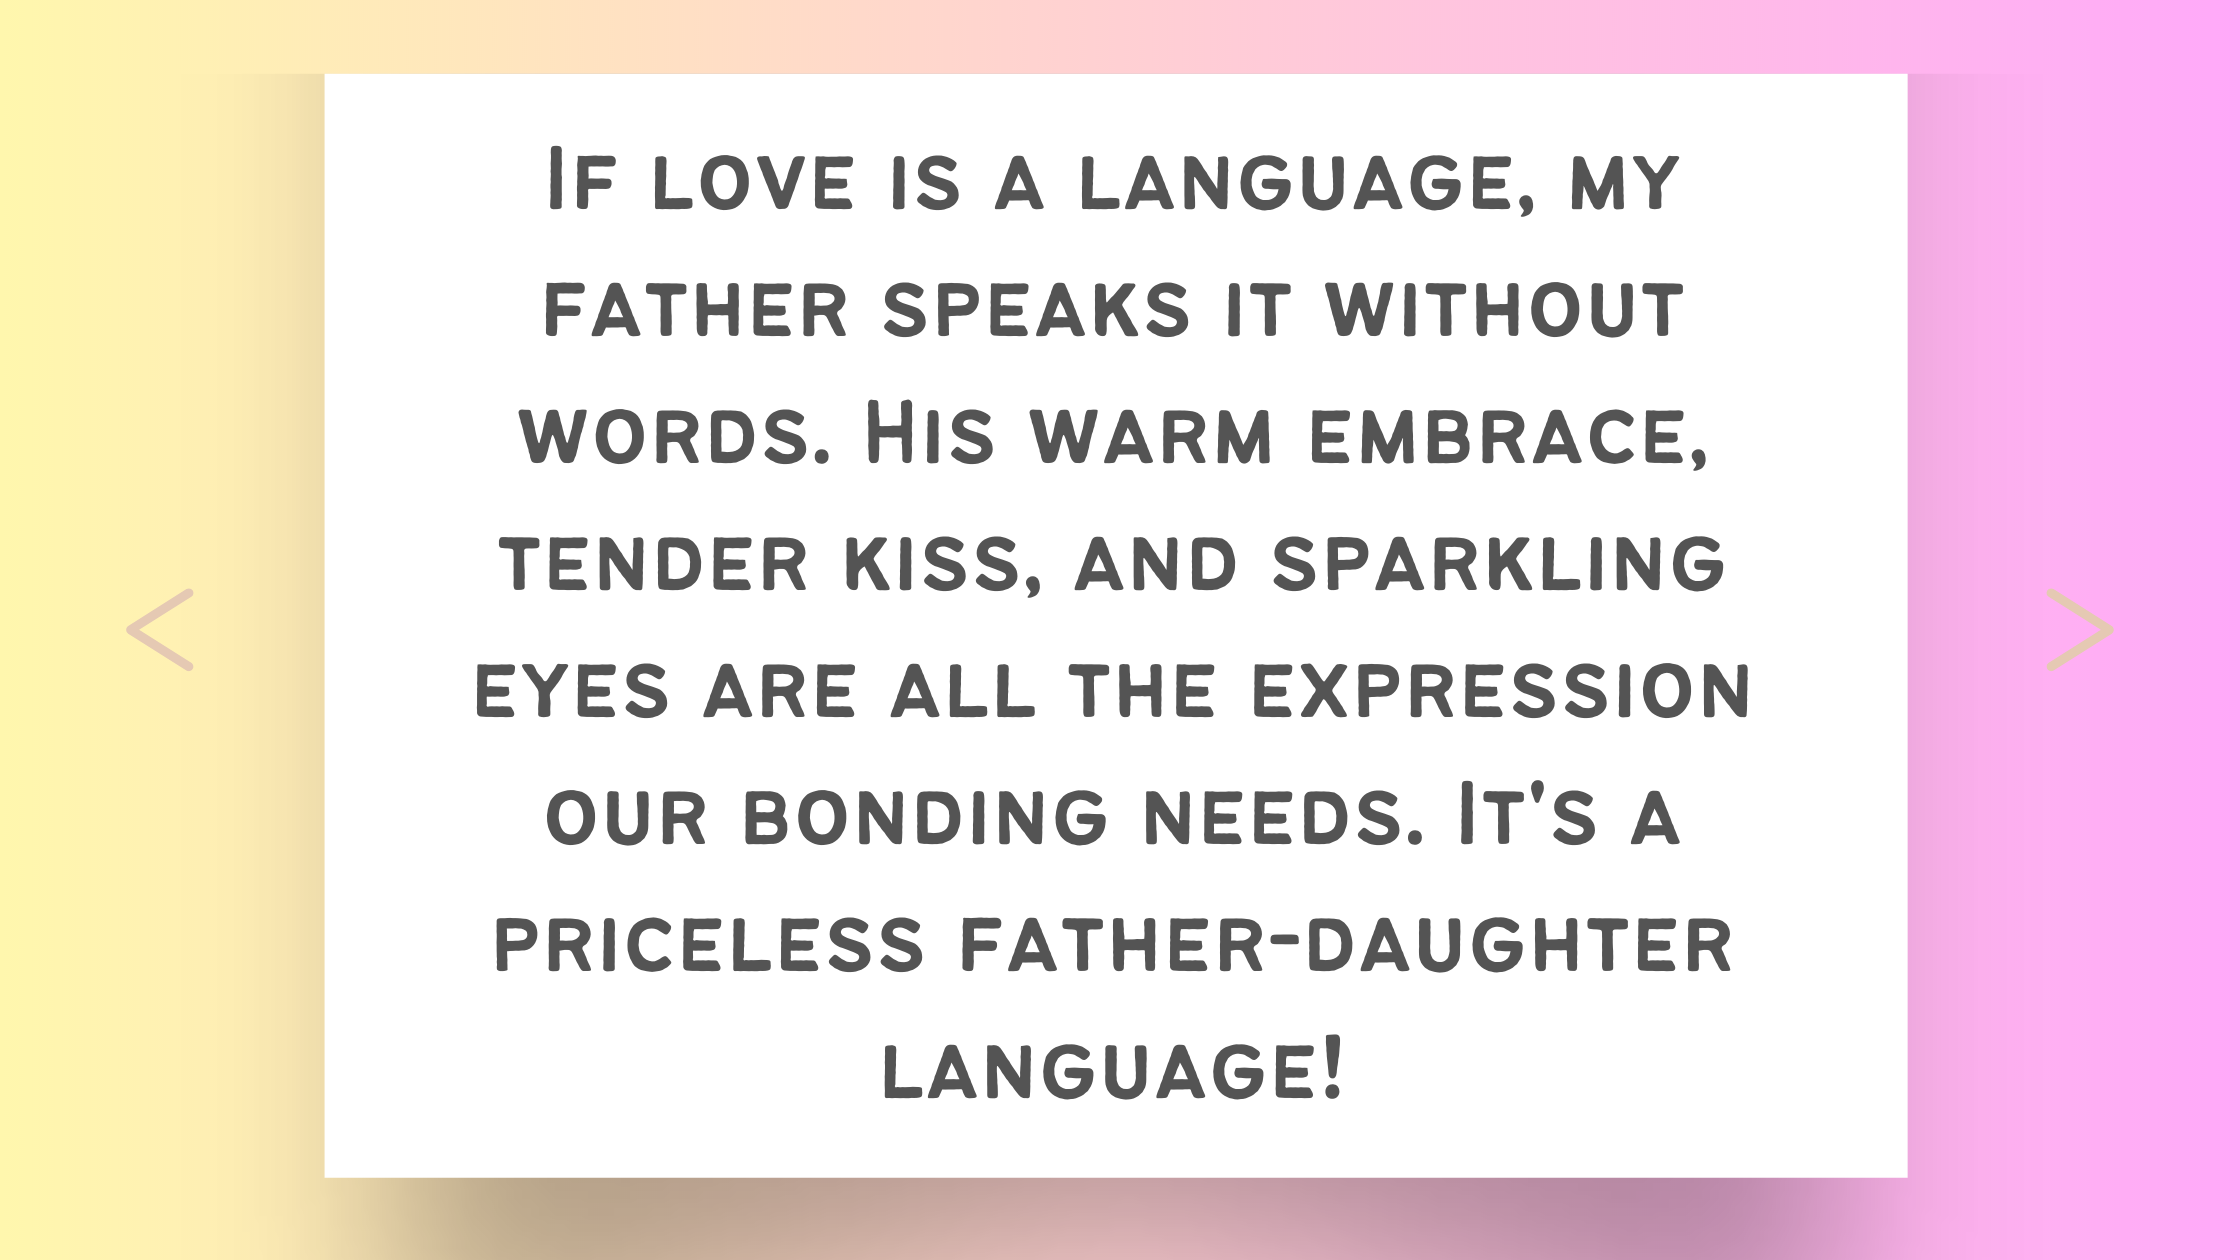 10 Heartwarming Father-Daughter Bond Quotes to Celebrate This Special Connection